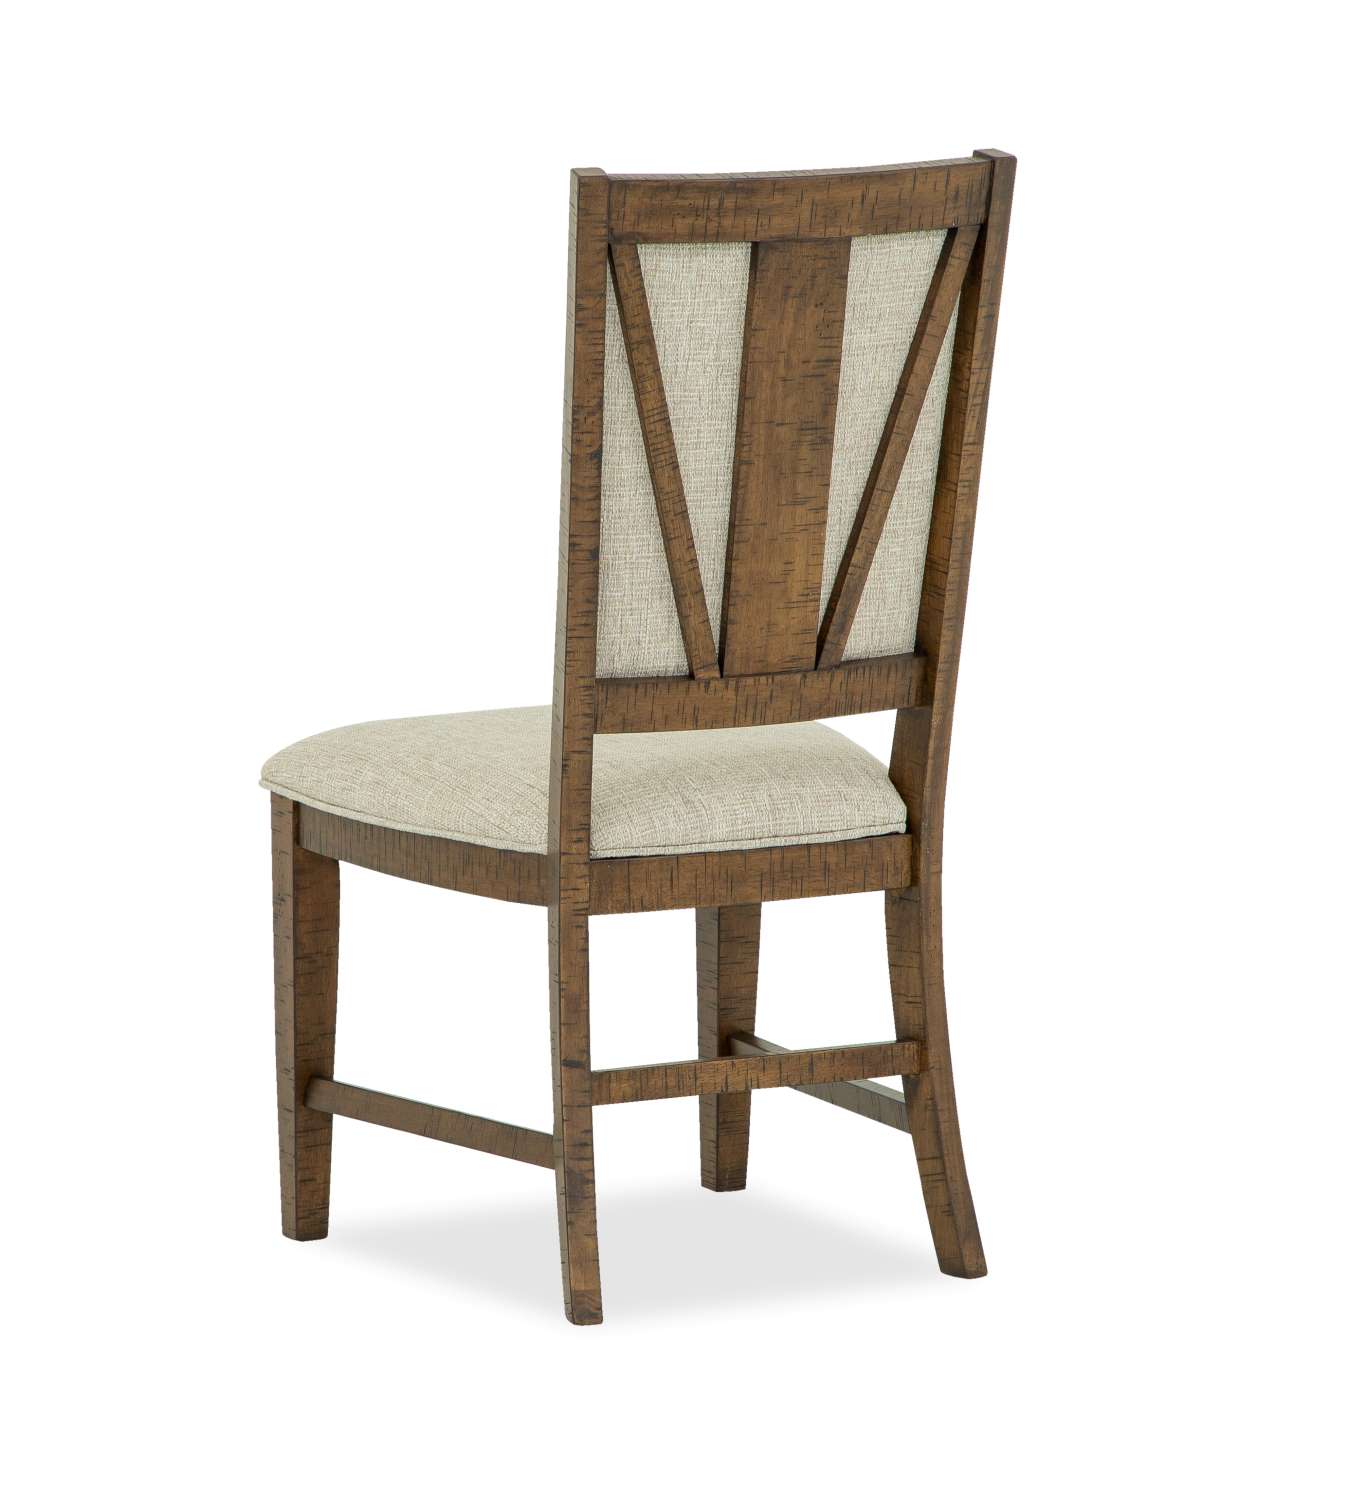 Wanita Dining Side Chair with Upholstered Seat and Back - Brown